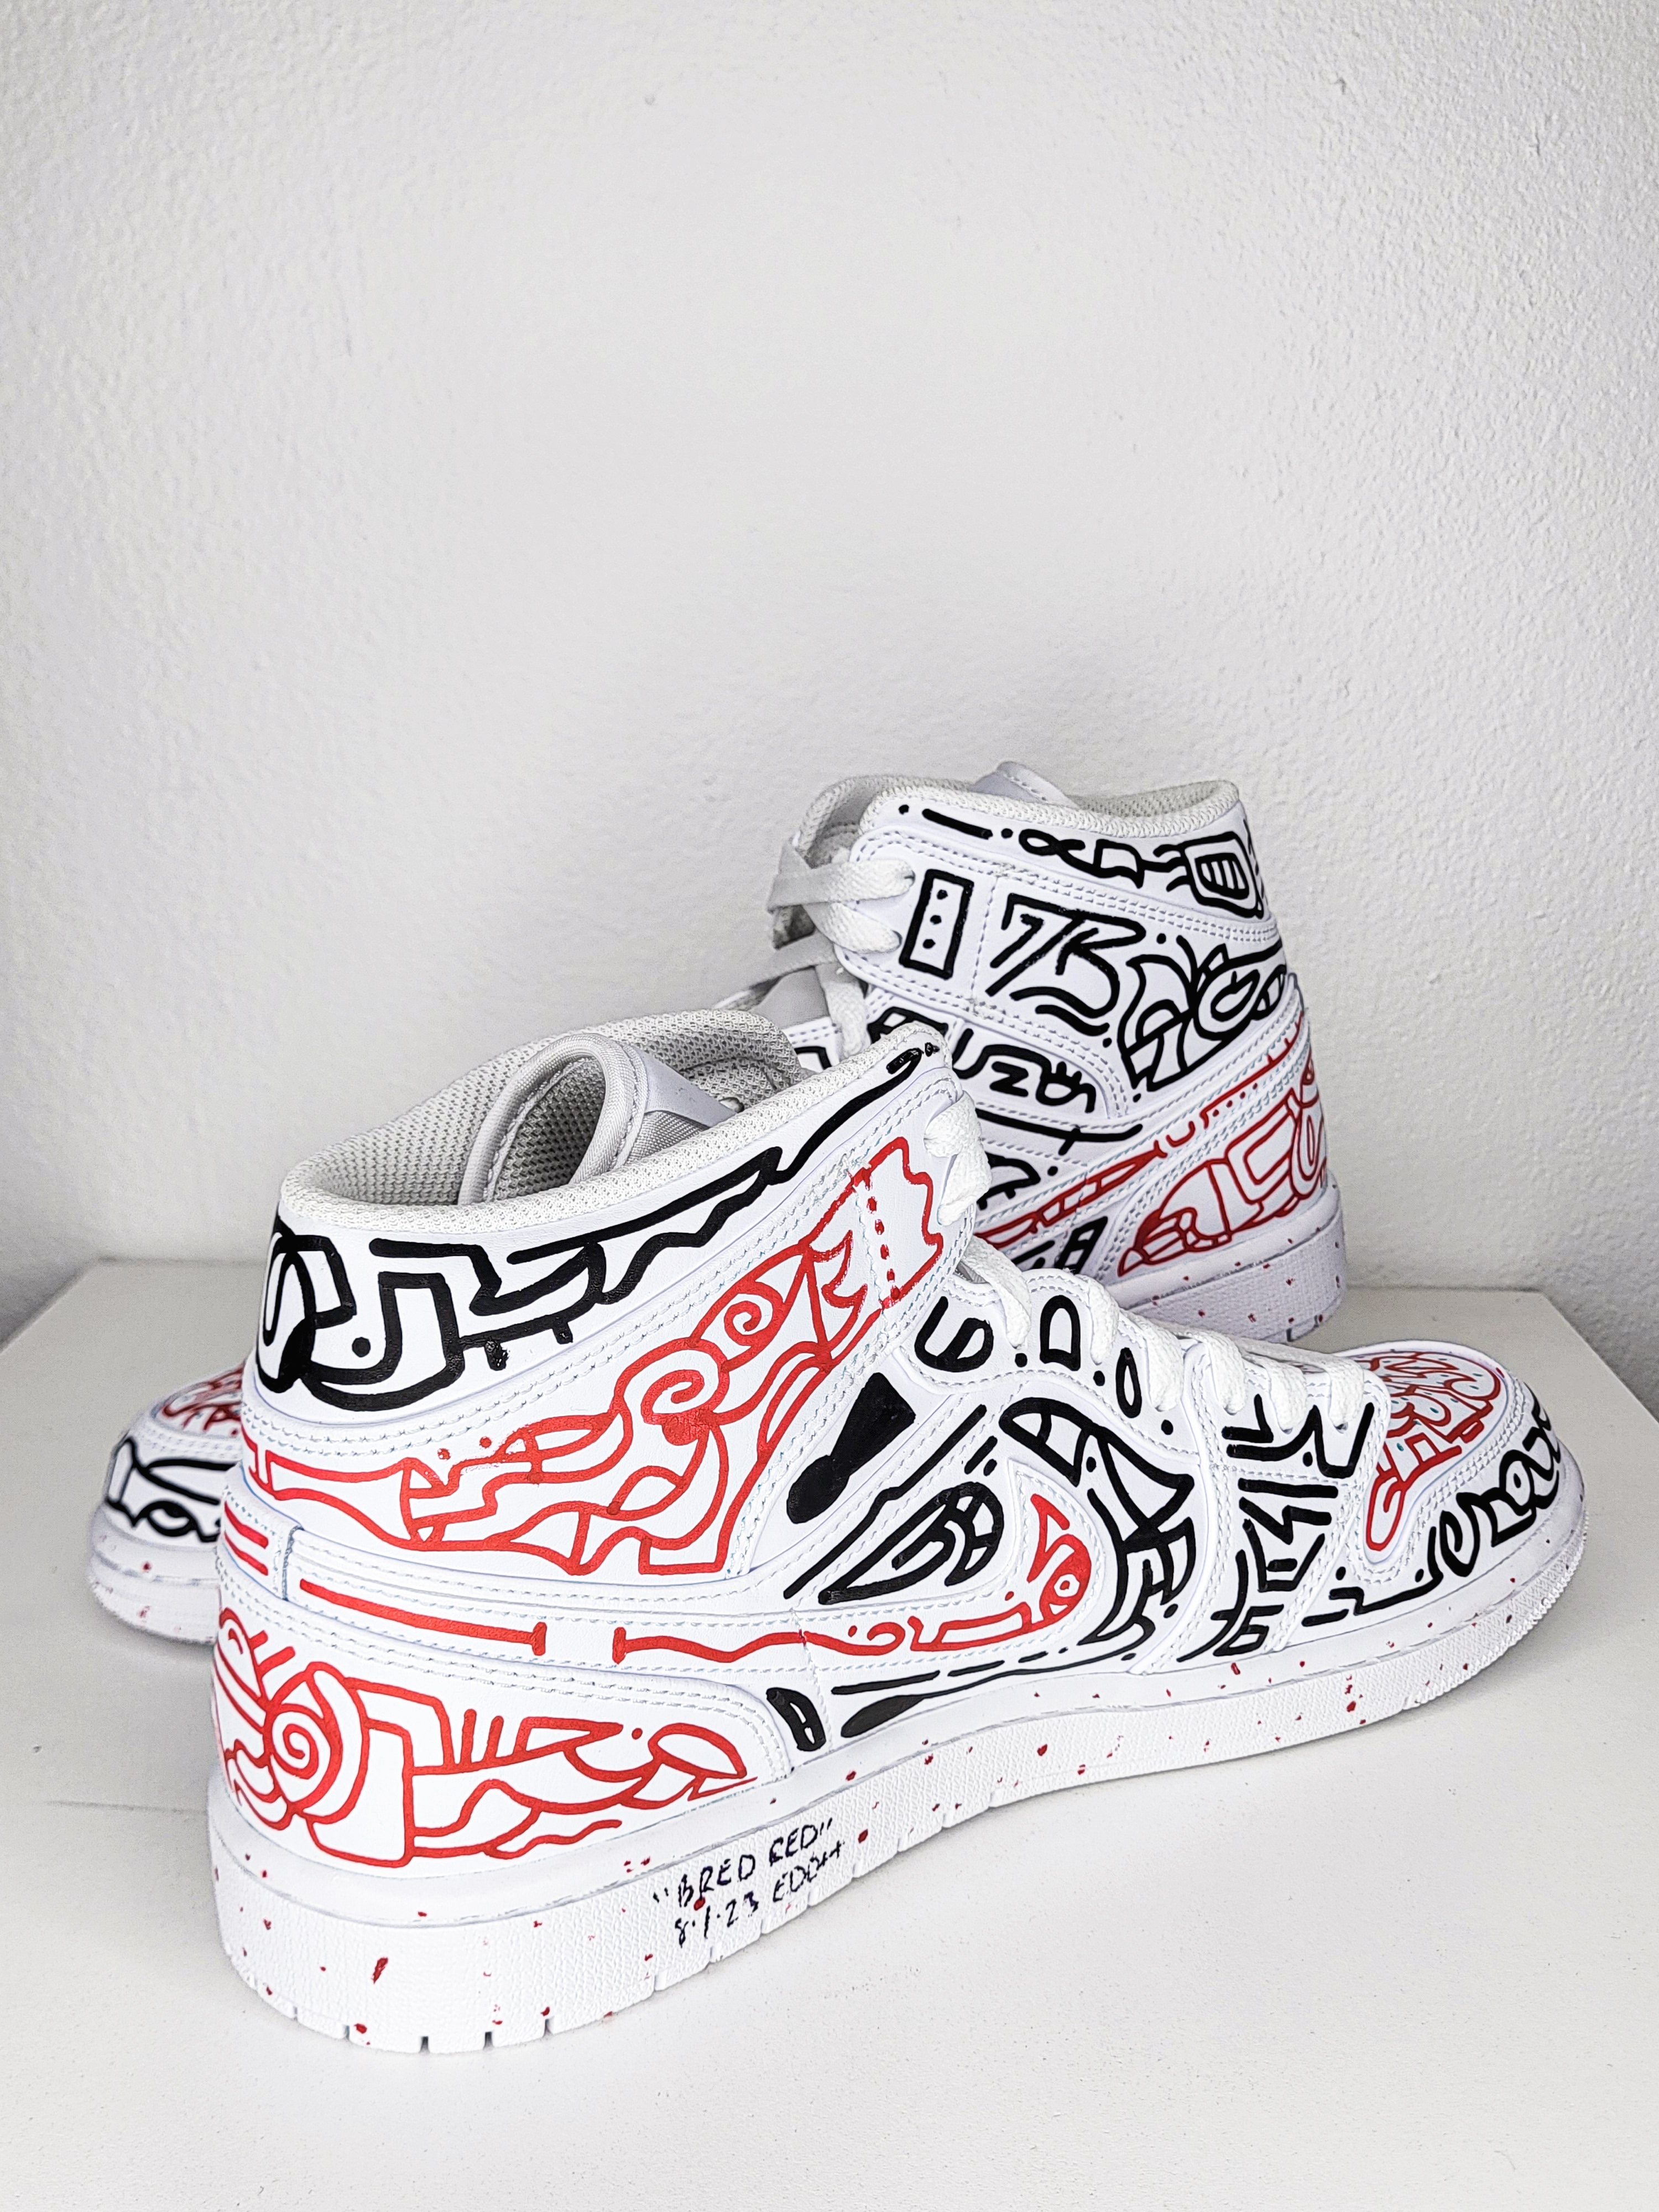 "3 Peat" Shoes by EDO